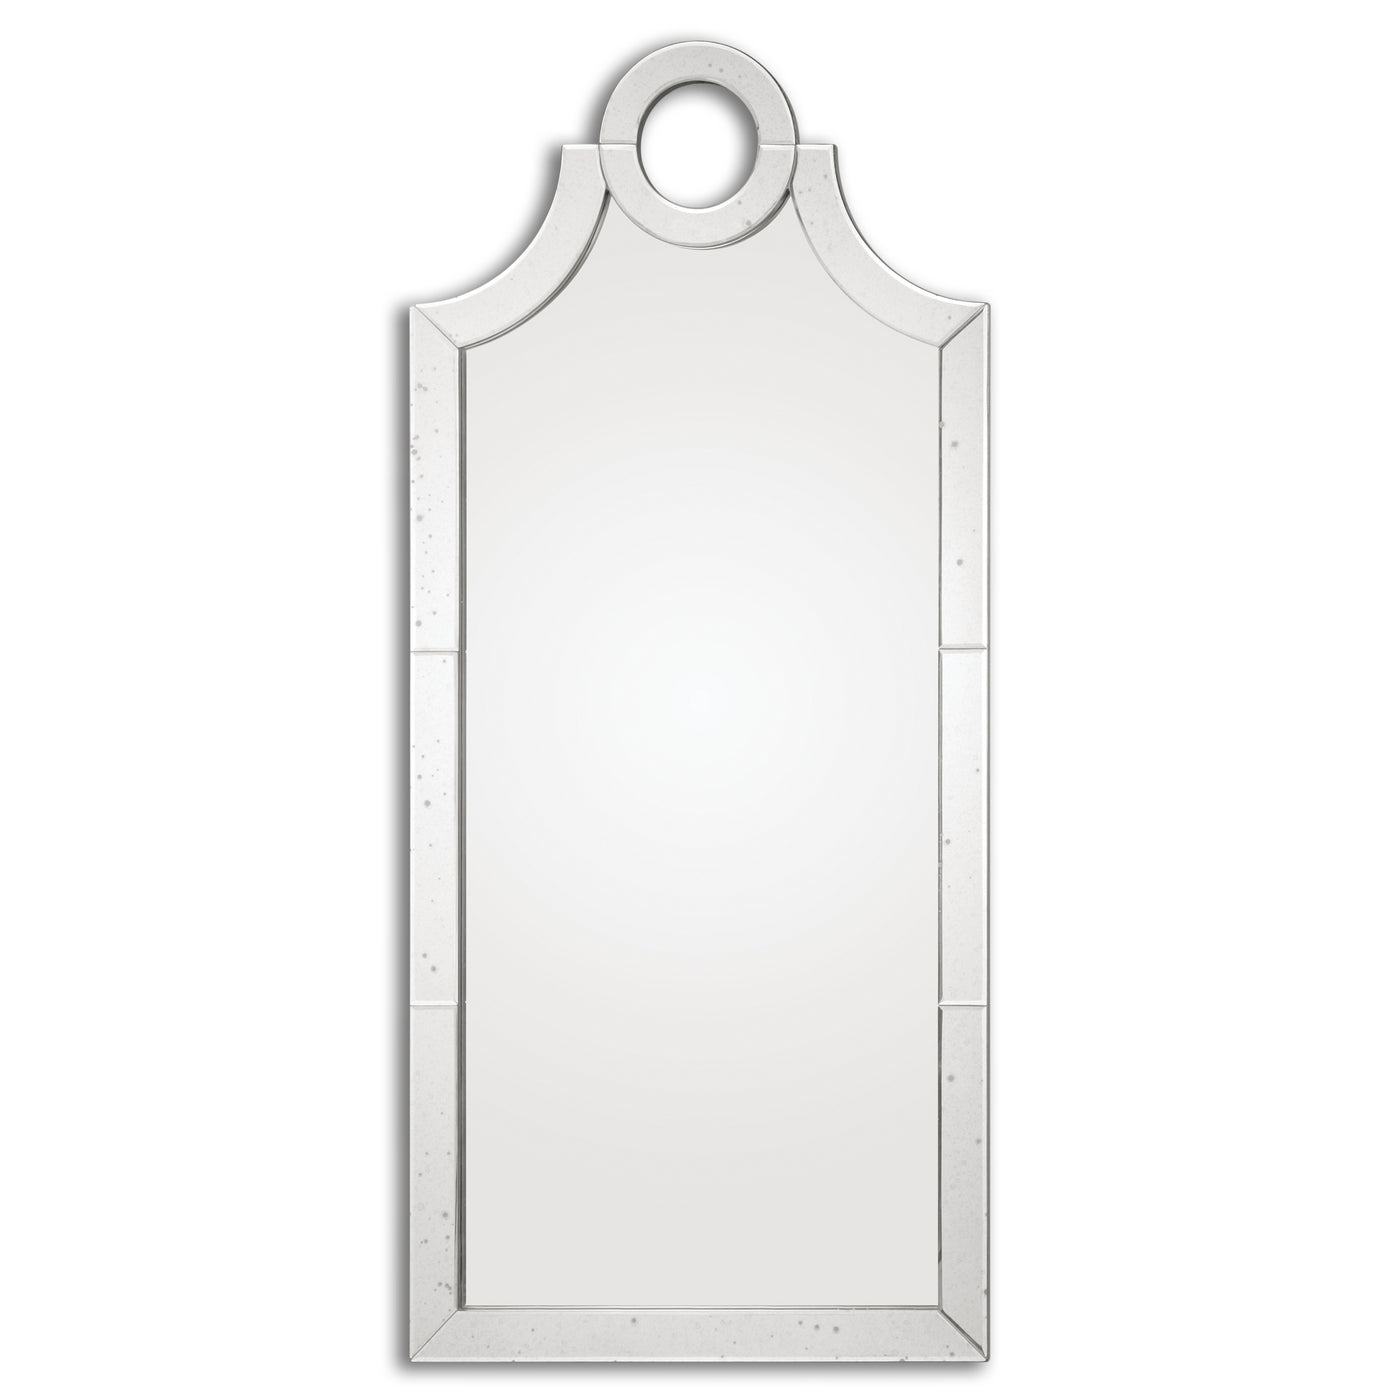 Frame Is Constructed Of Lightly Antiqued, Beveled Mirror Tiles.